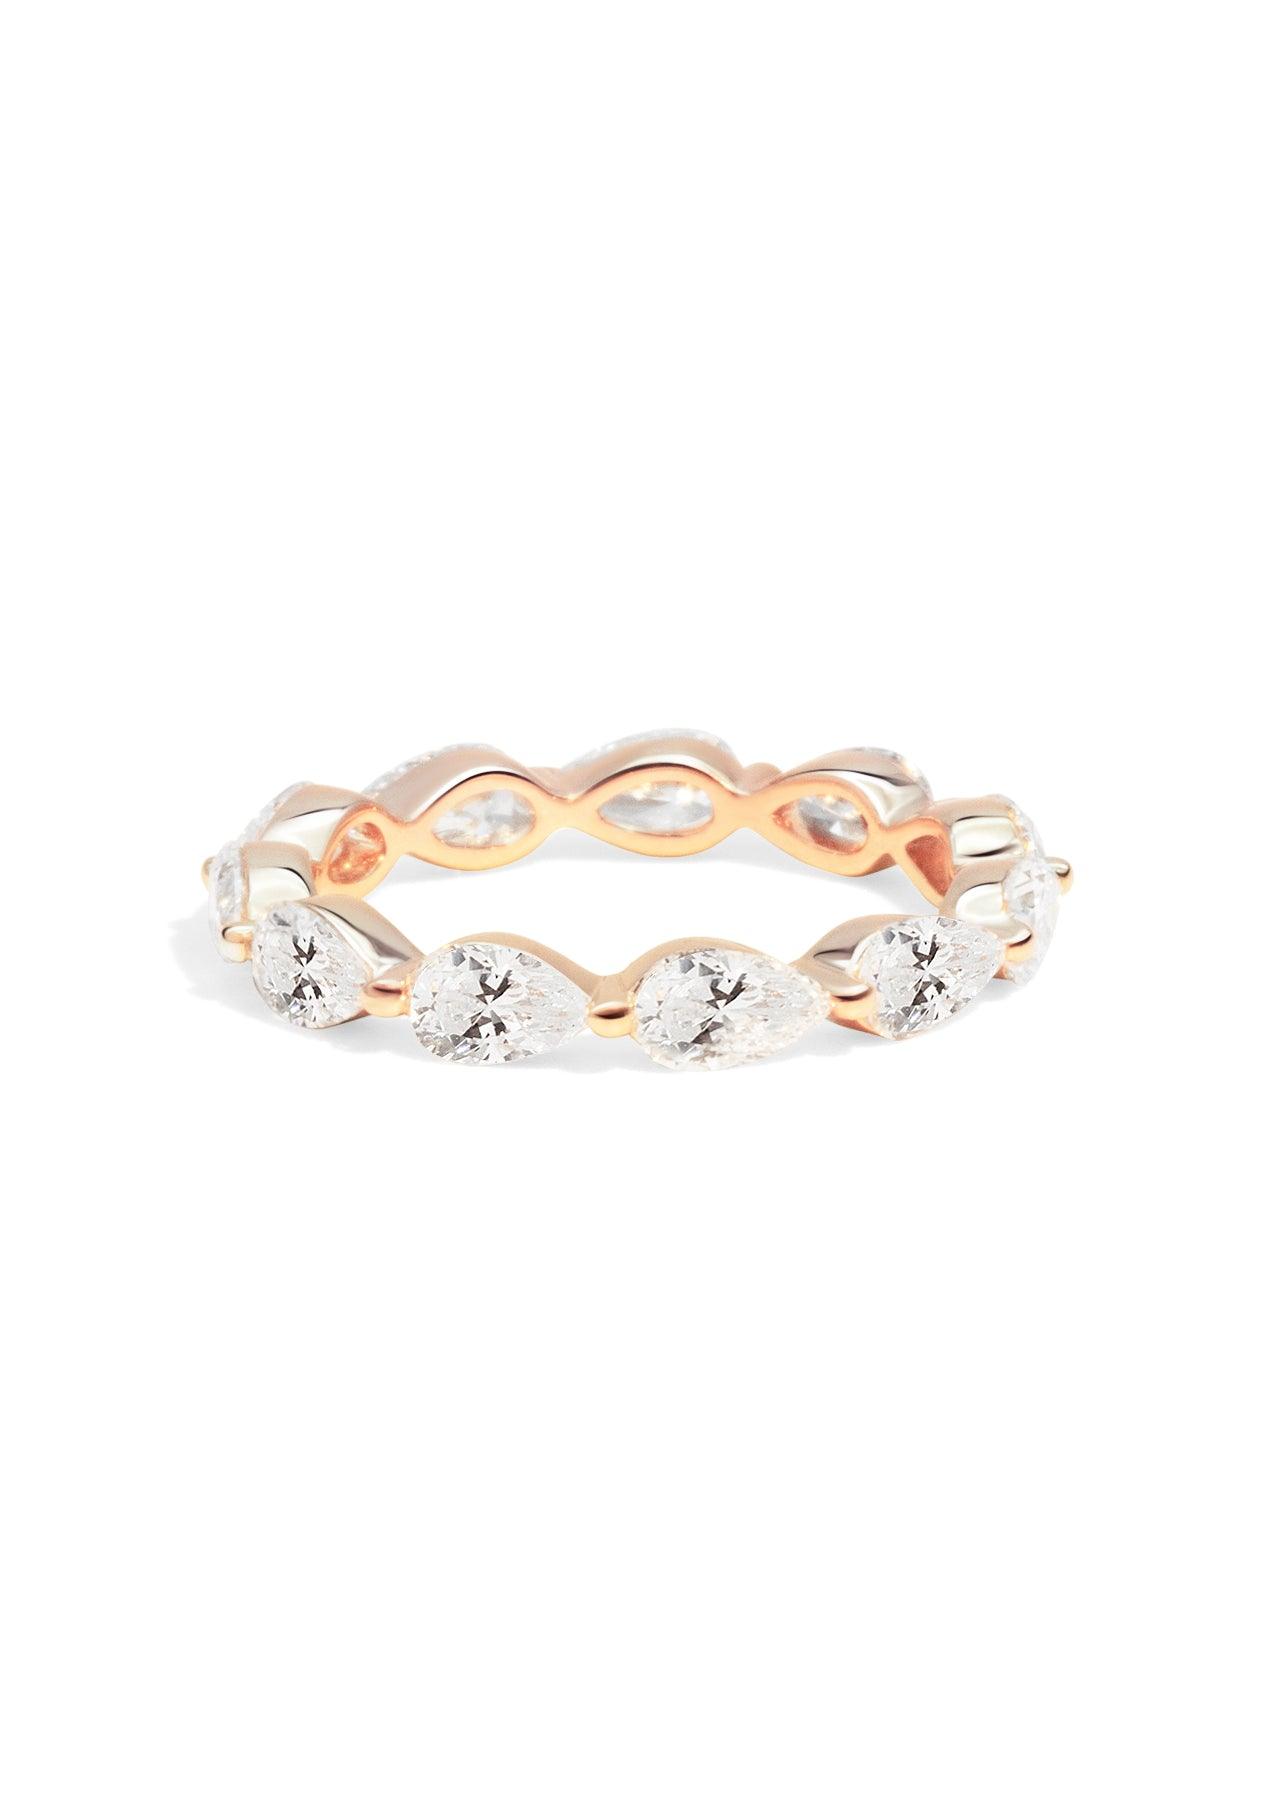 The Pirouette Rose Gold Diamond Band